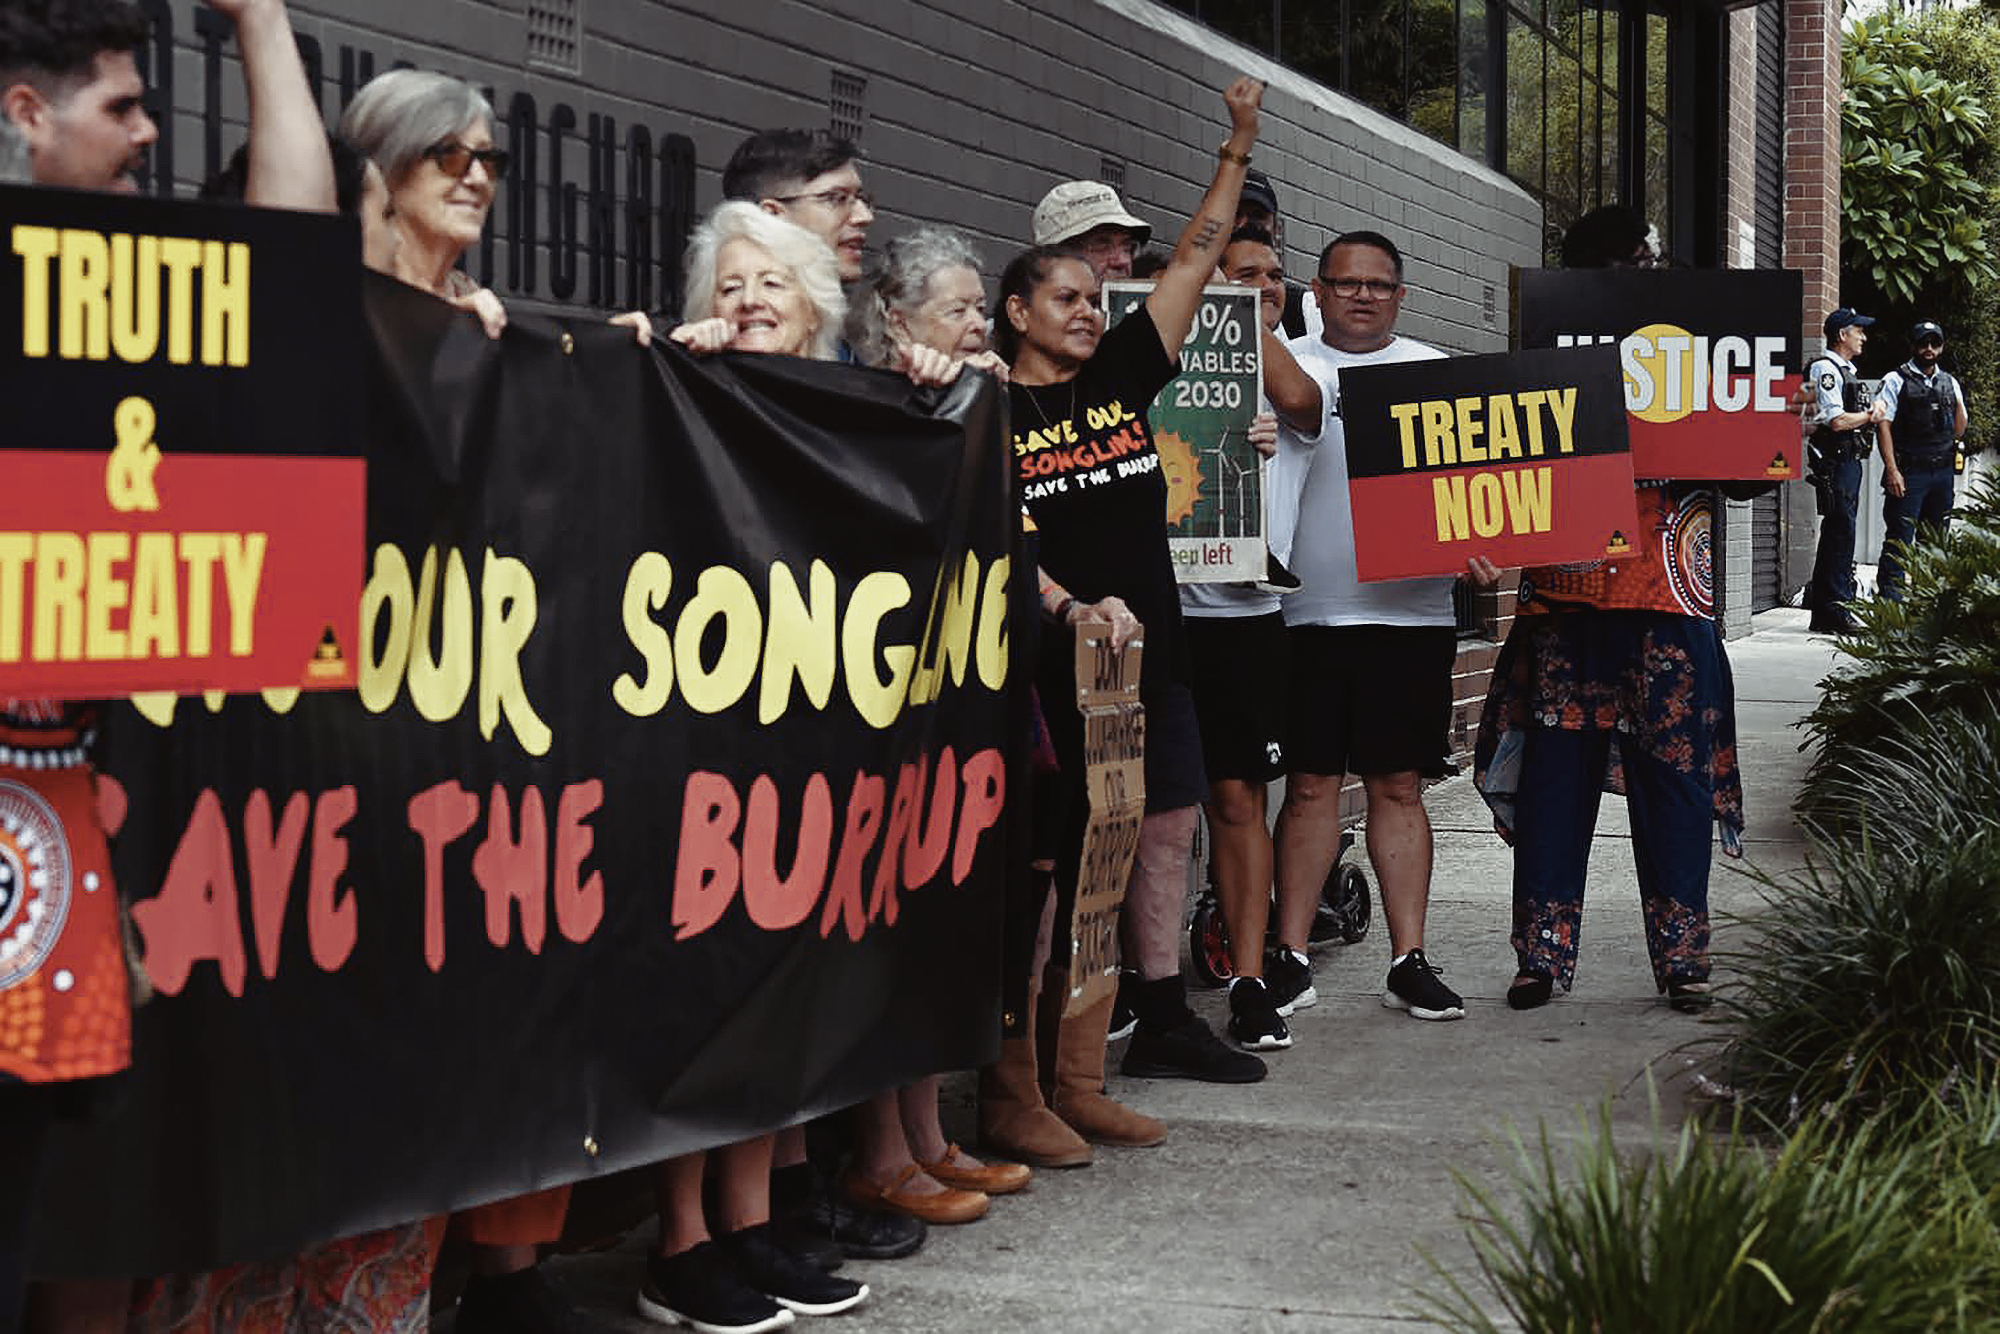 Protestors outside the Environment Minister Tanya Plibersek’s office in Sydney as part of their campaign to protect sacred Murujuga rock art from industrial developers